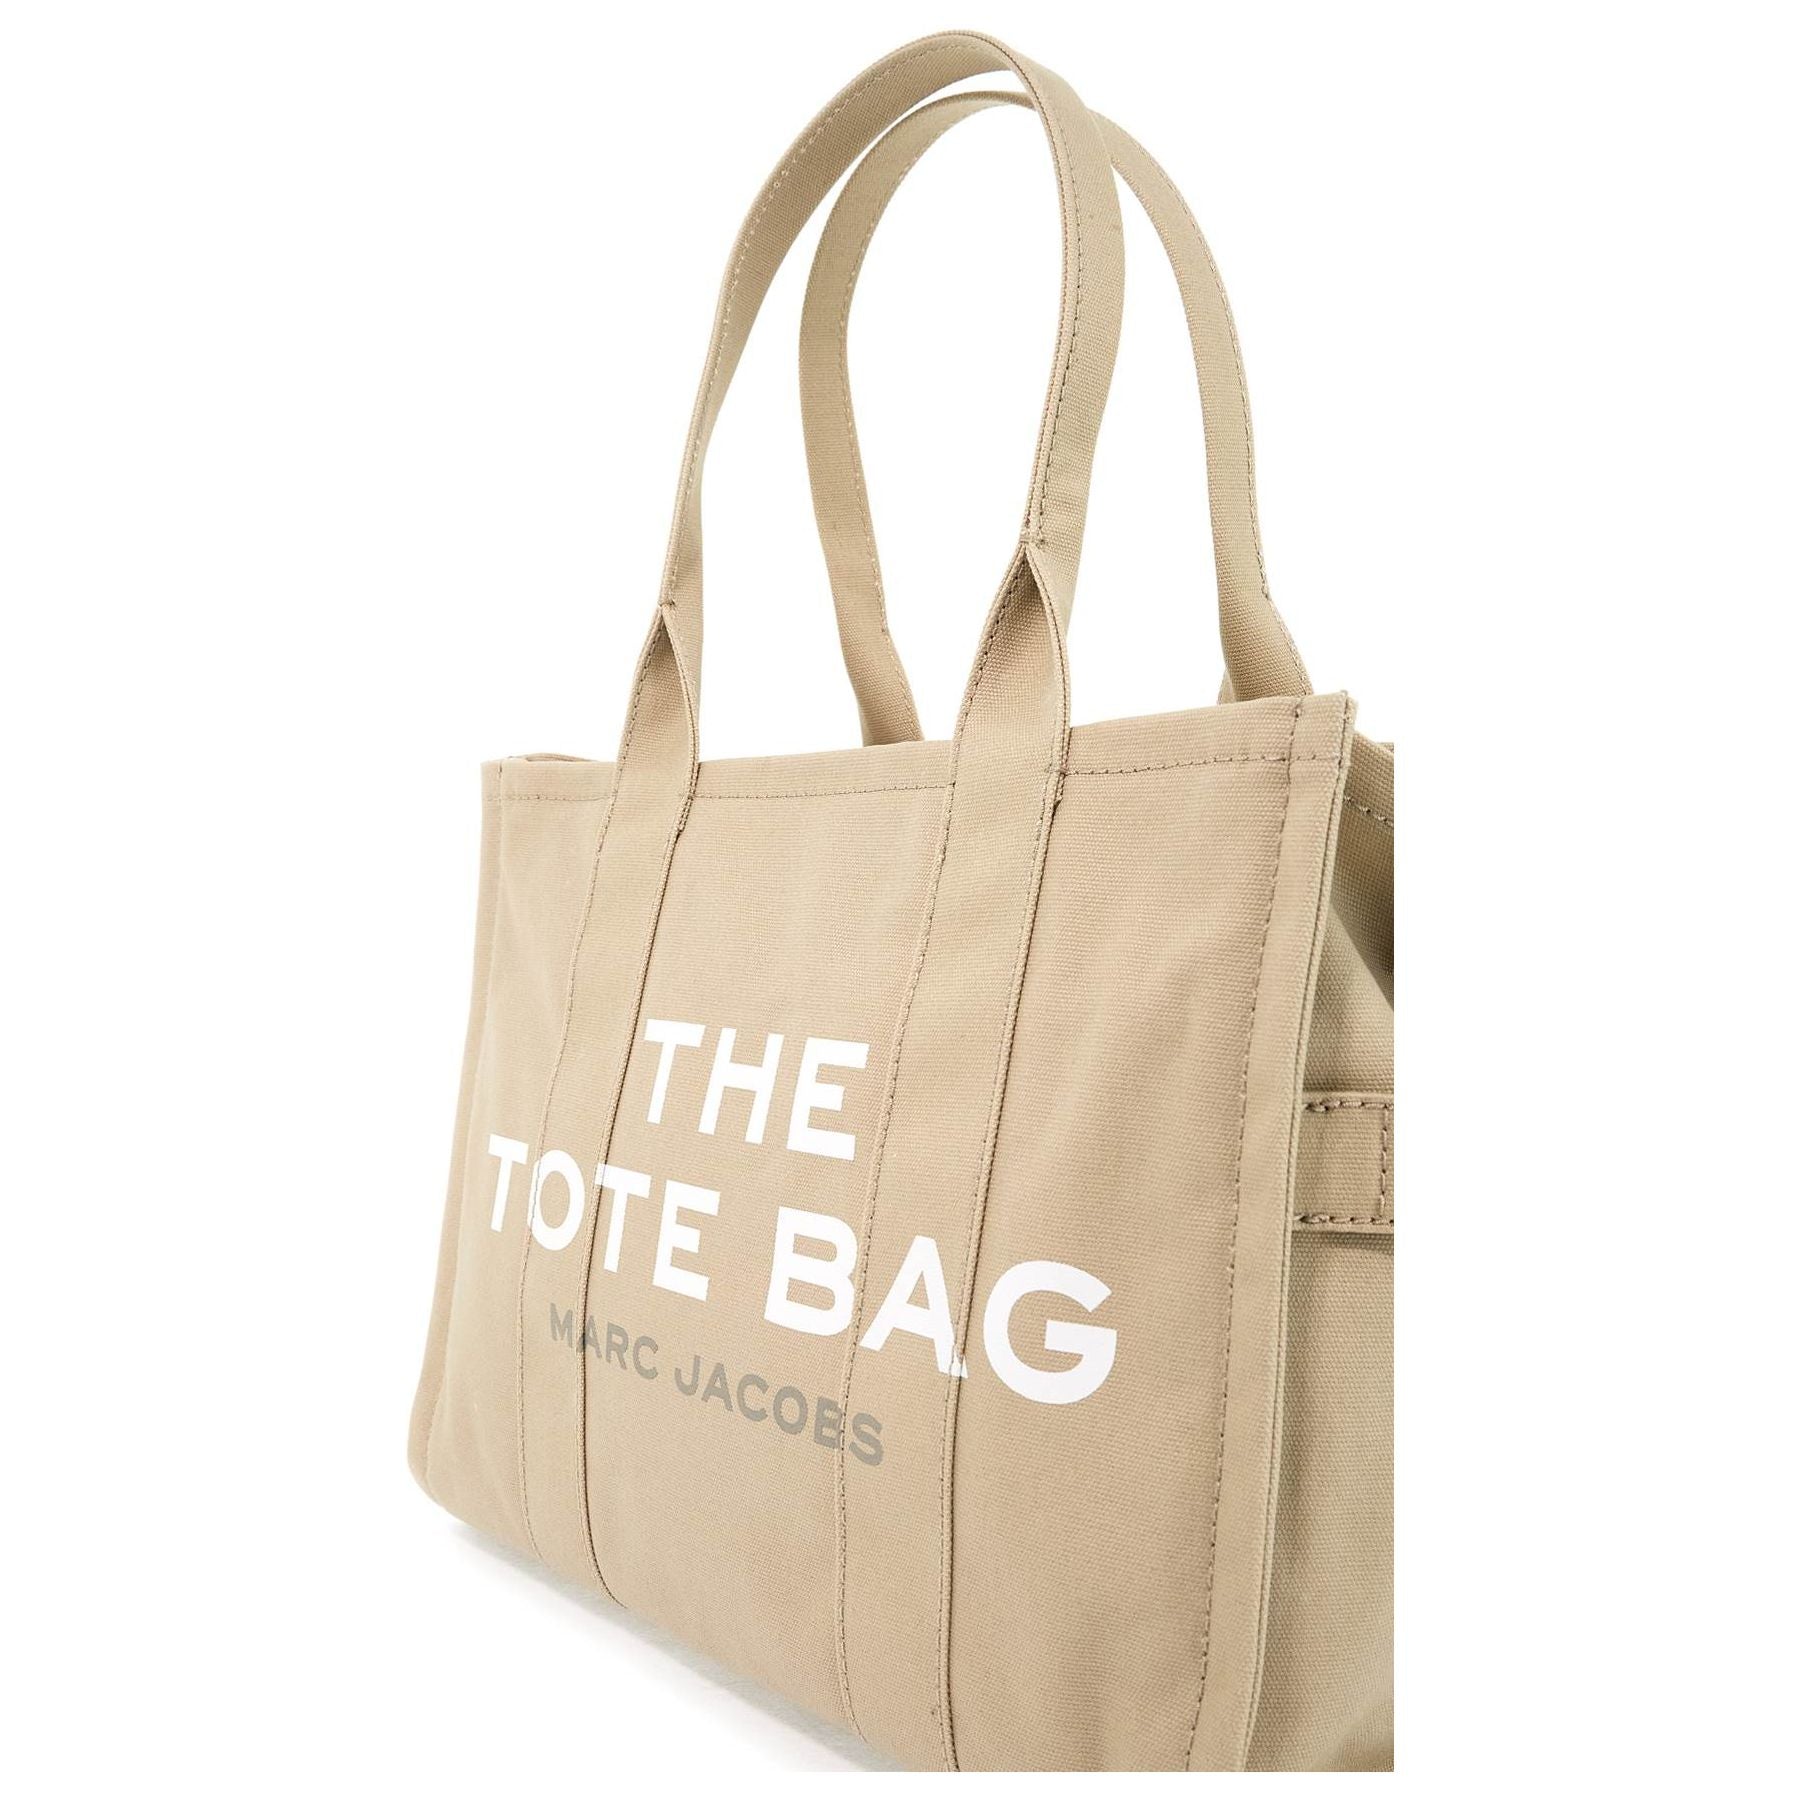 The Canvas Large Tote Bag